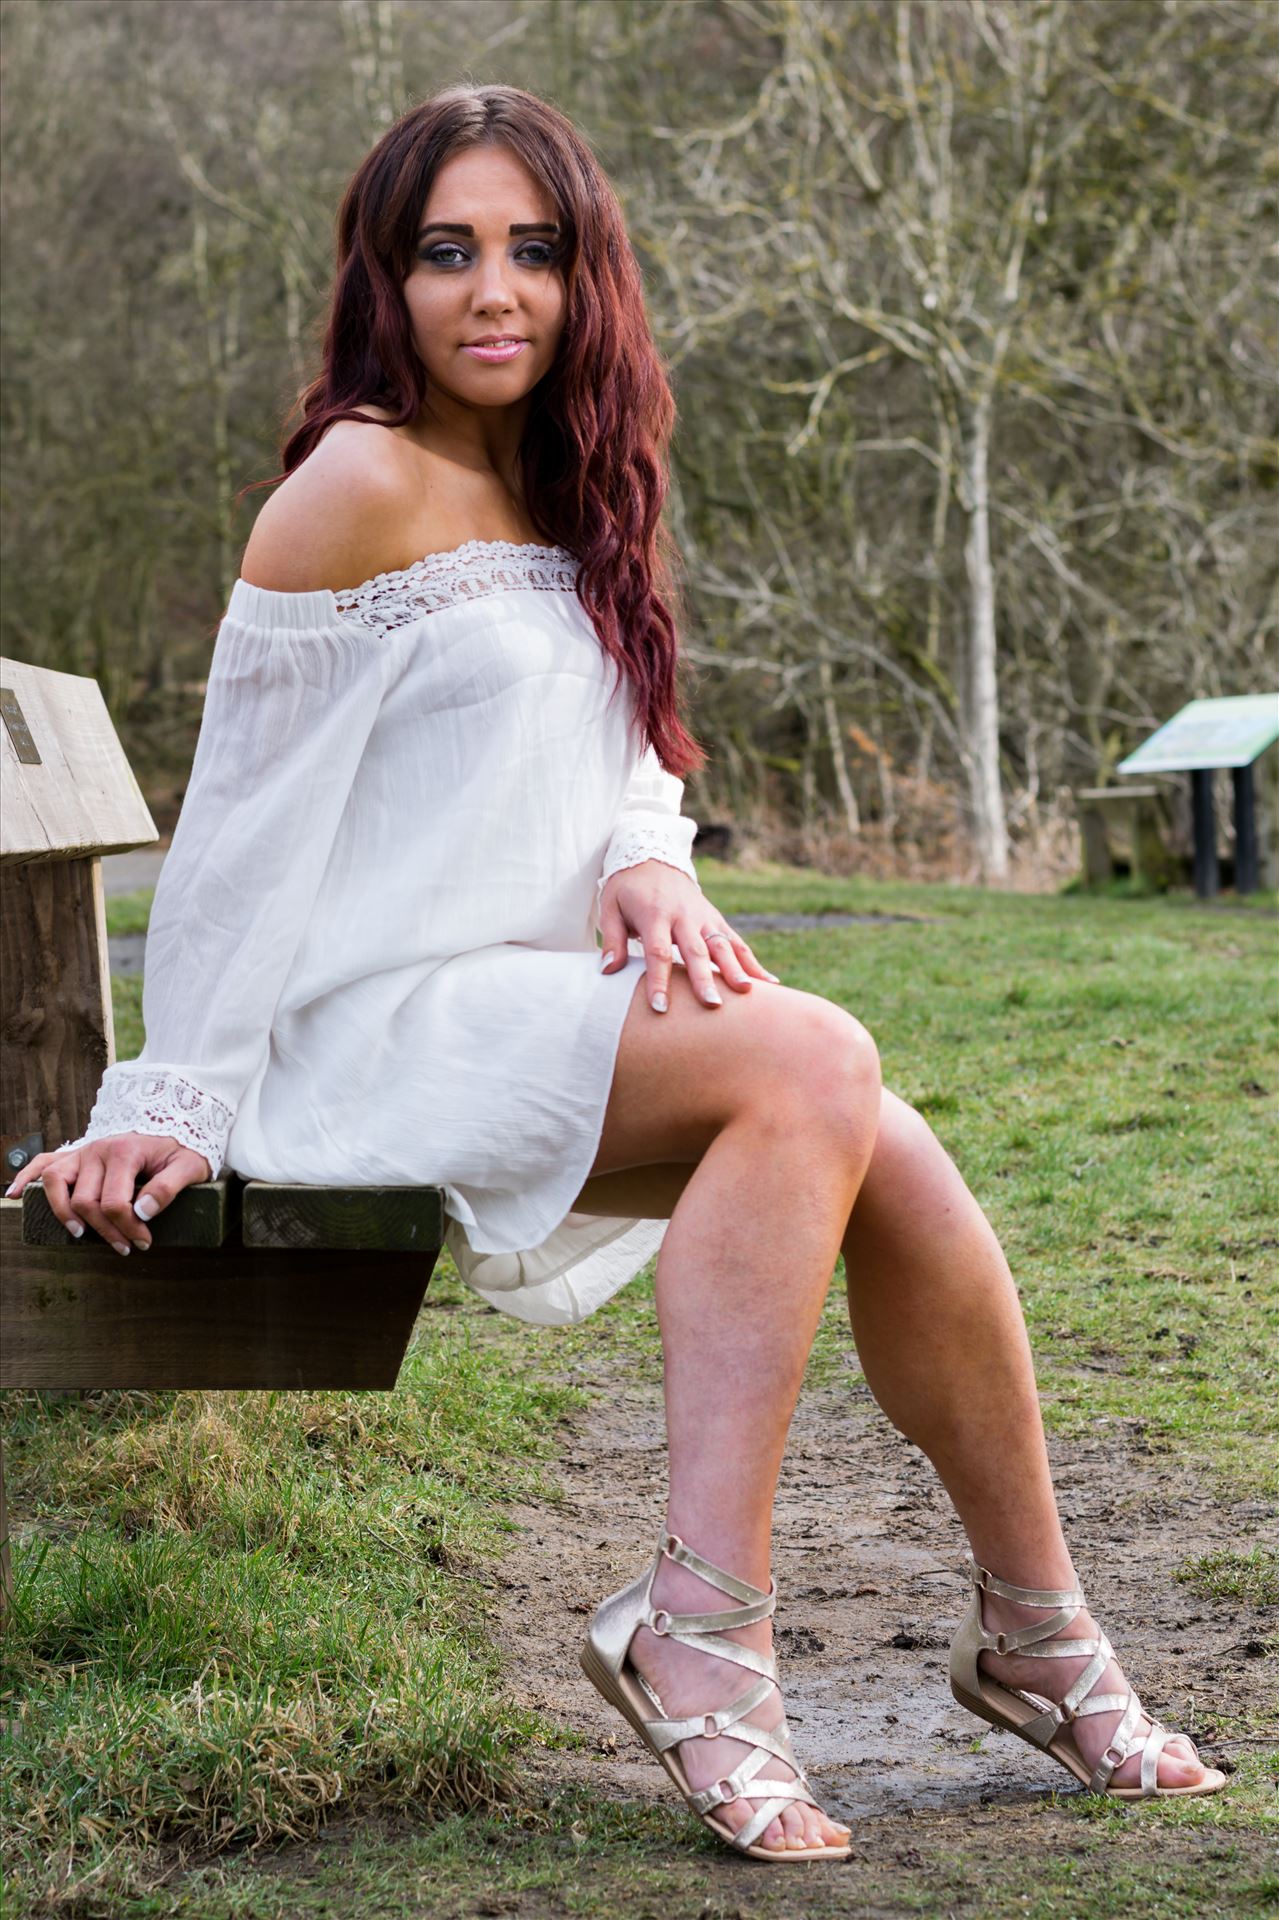 Jenny Clewlow 34 - A photo of the model Jenny Clewlow, only available on this site. by AJ Stoves Photography